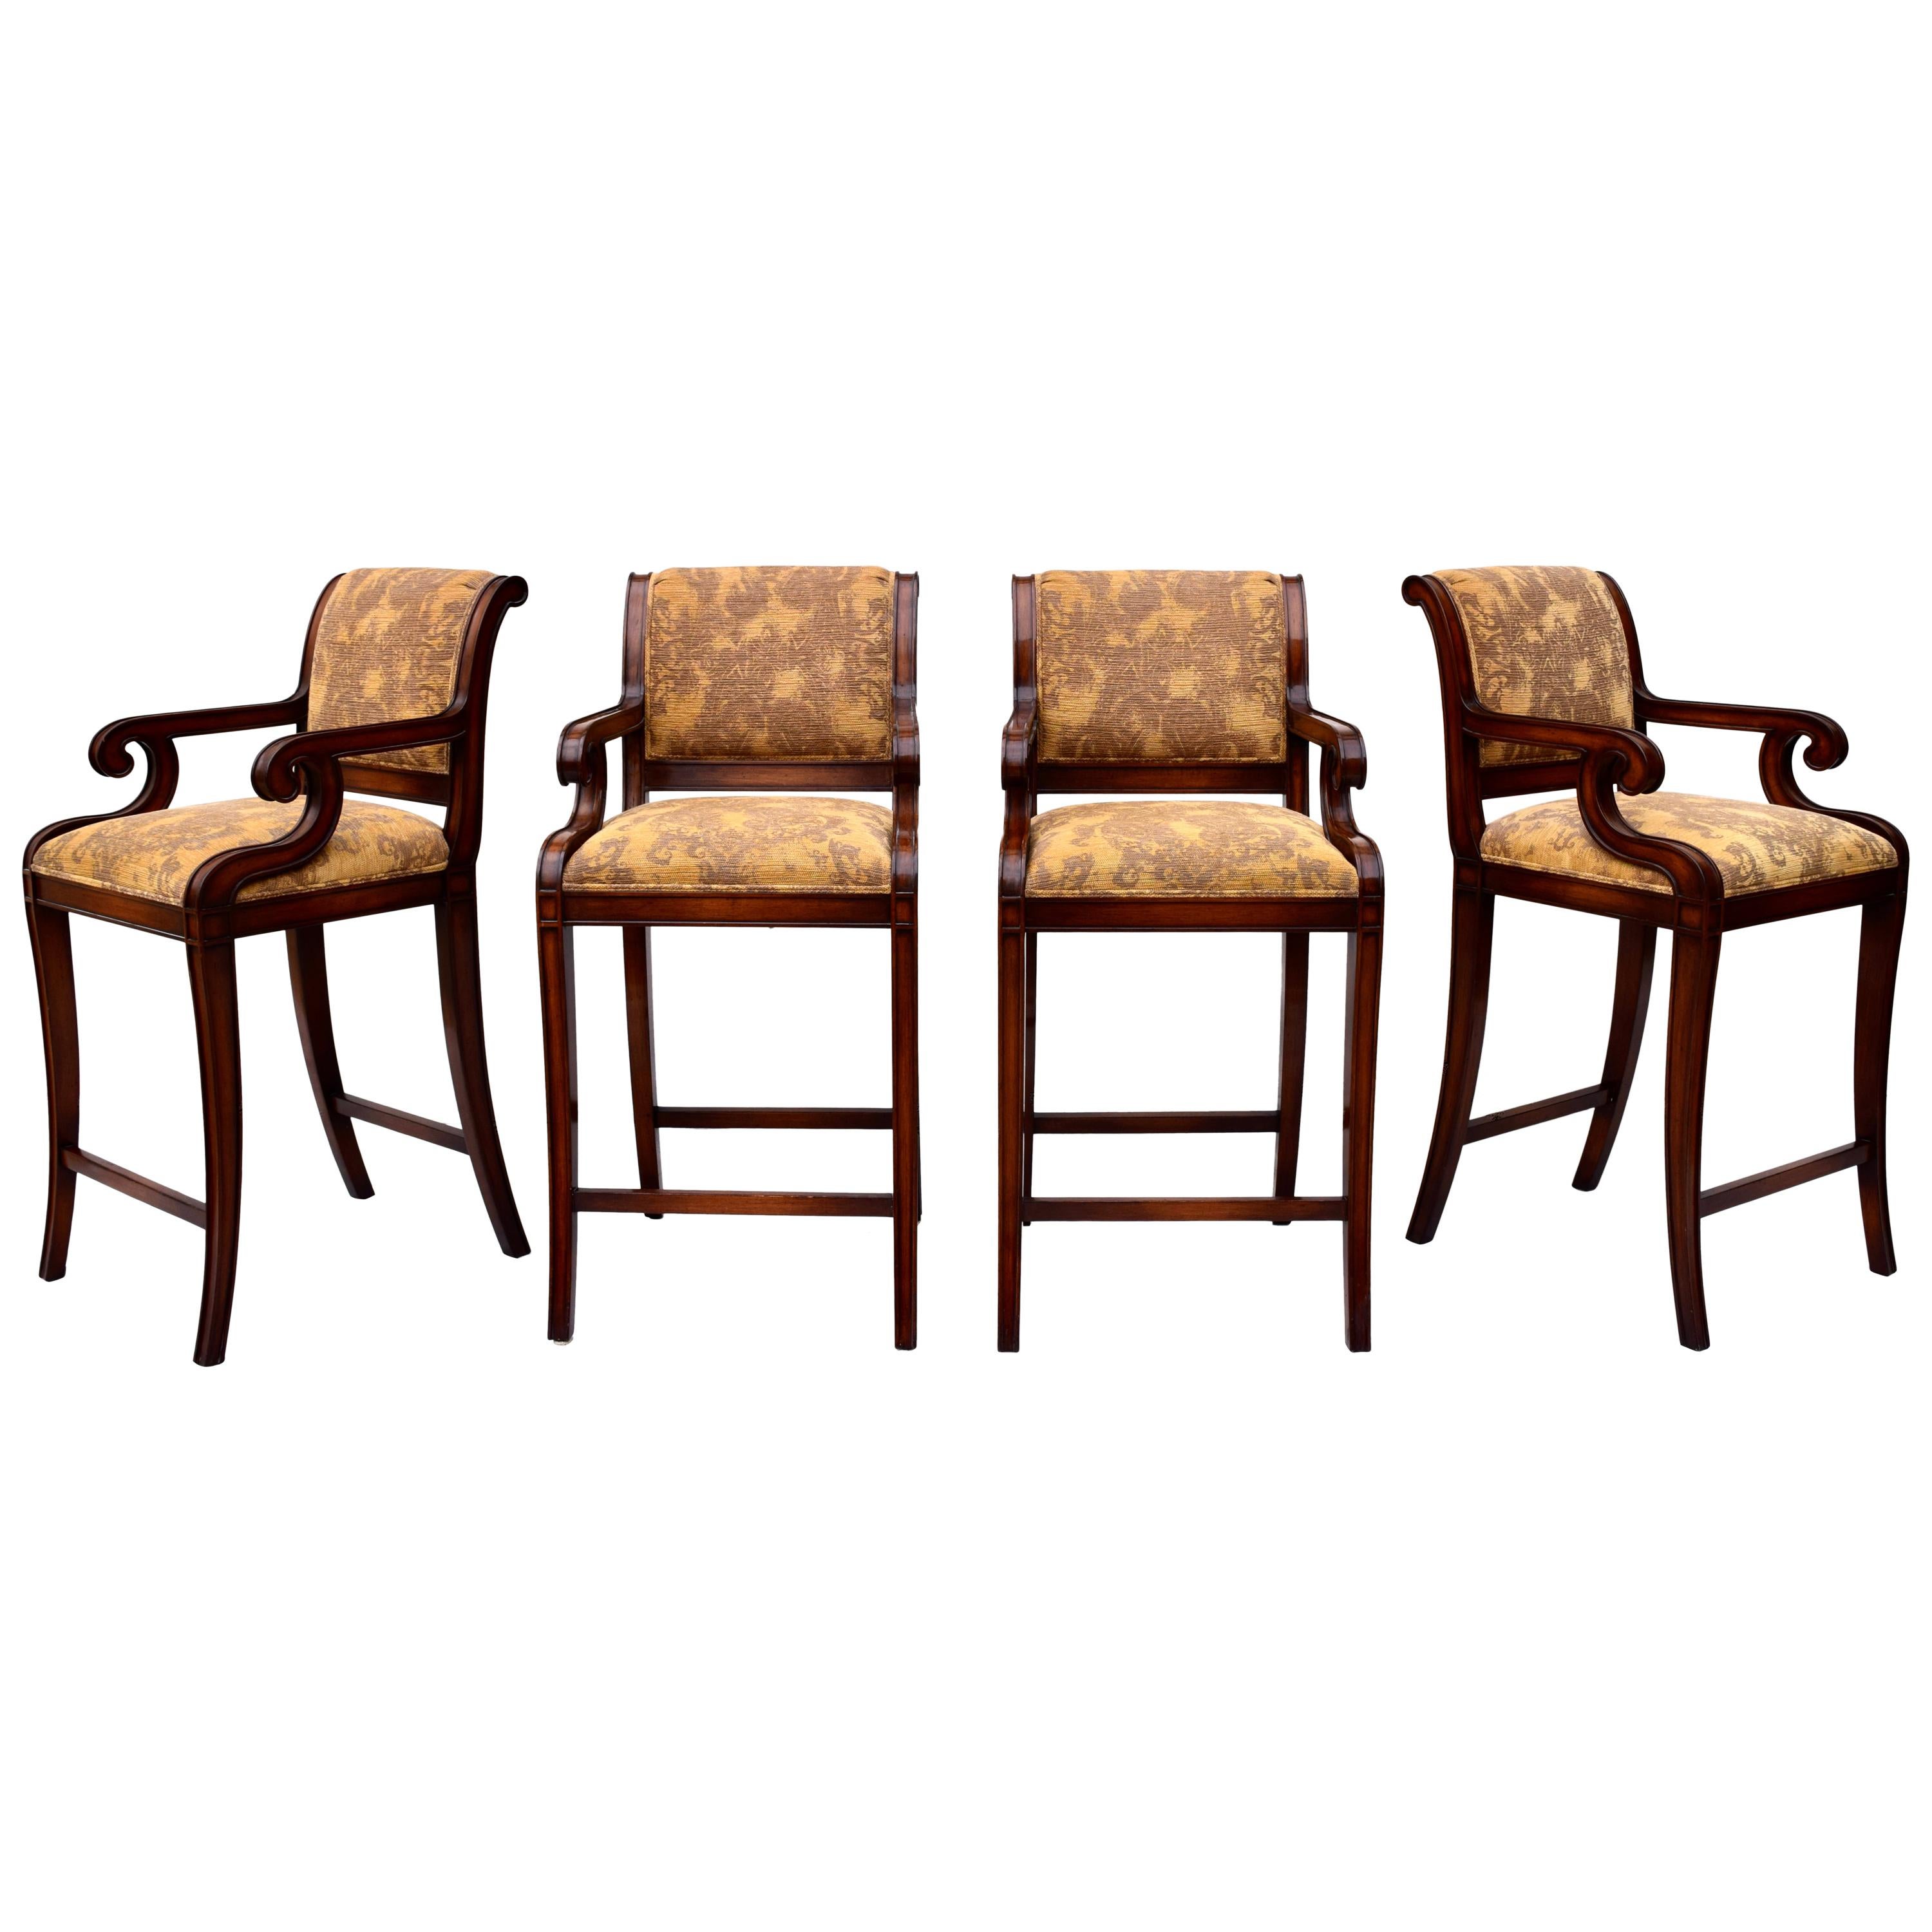 Nancy Corzine Classic Regency bar chairs item # 8011 in English walnut waxed finish with tags.  Sold as a pair the chairs are in exceptionally well maintained condition. Two sets available.